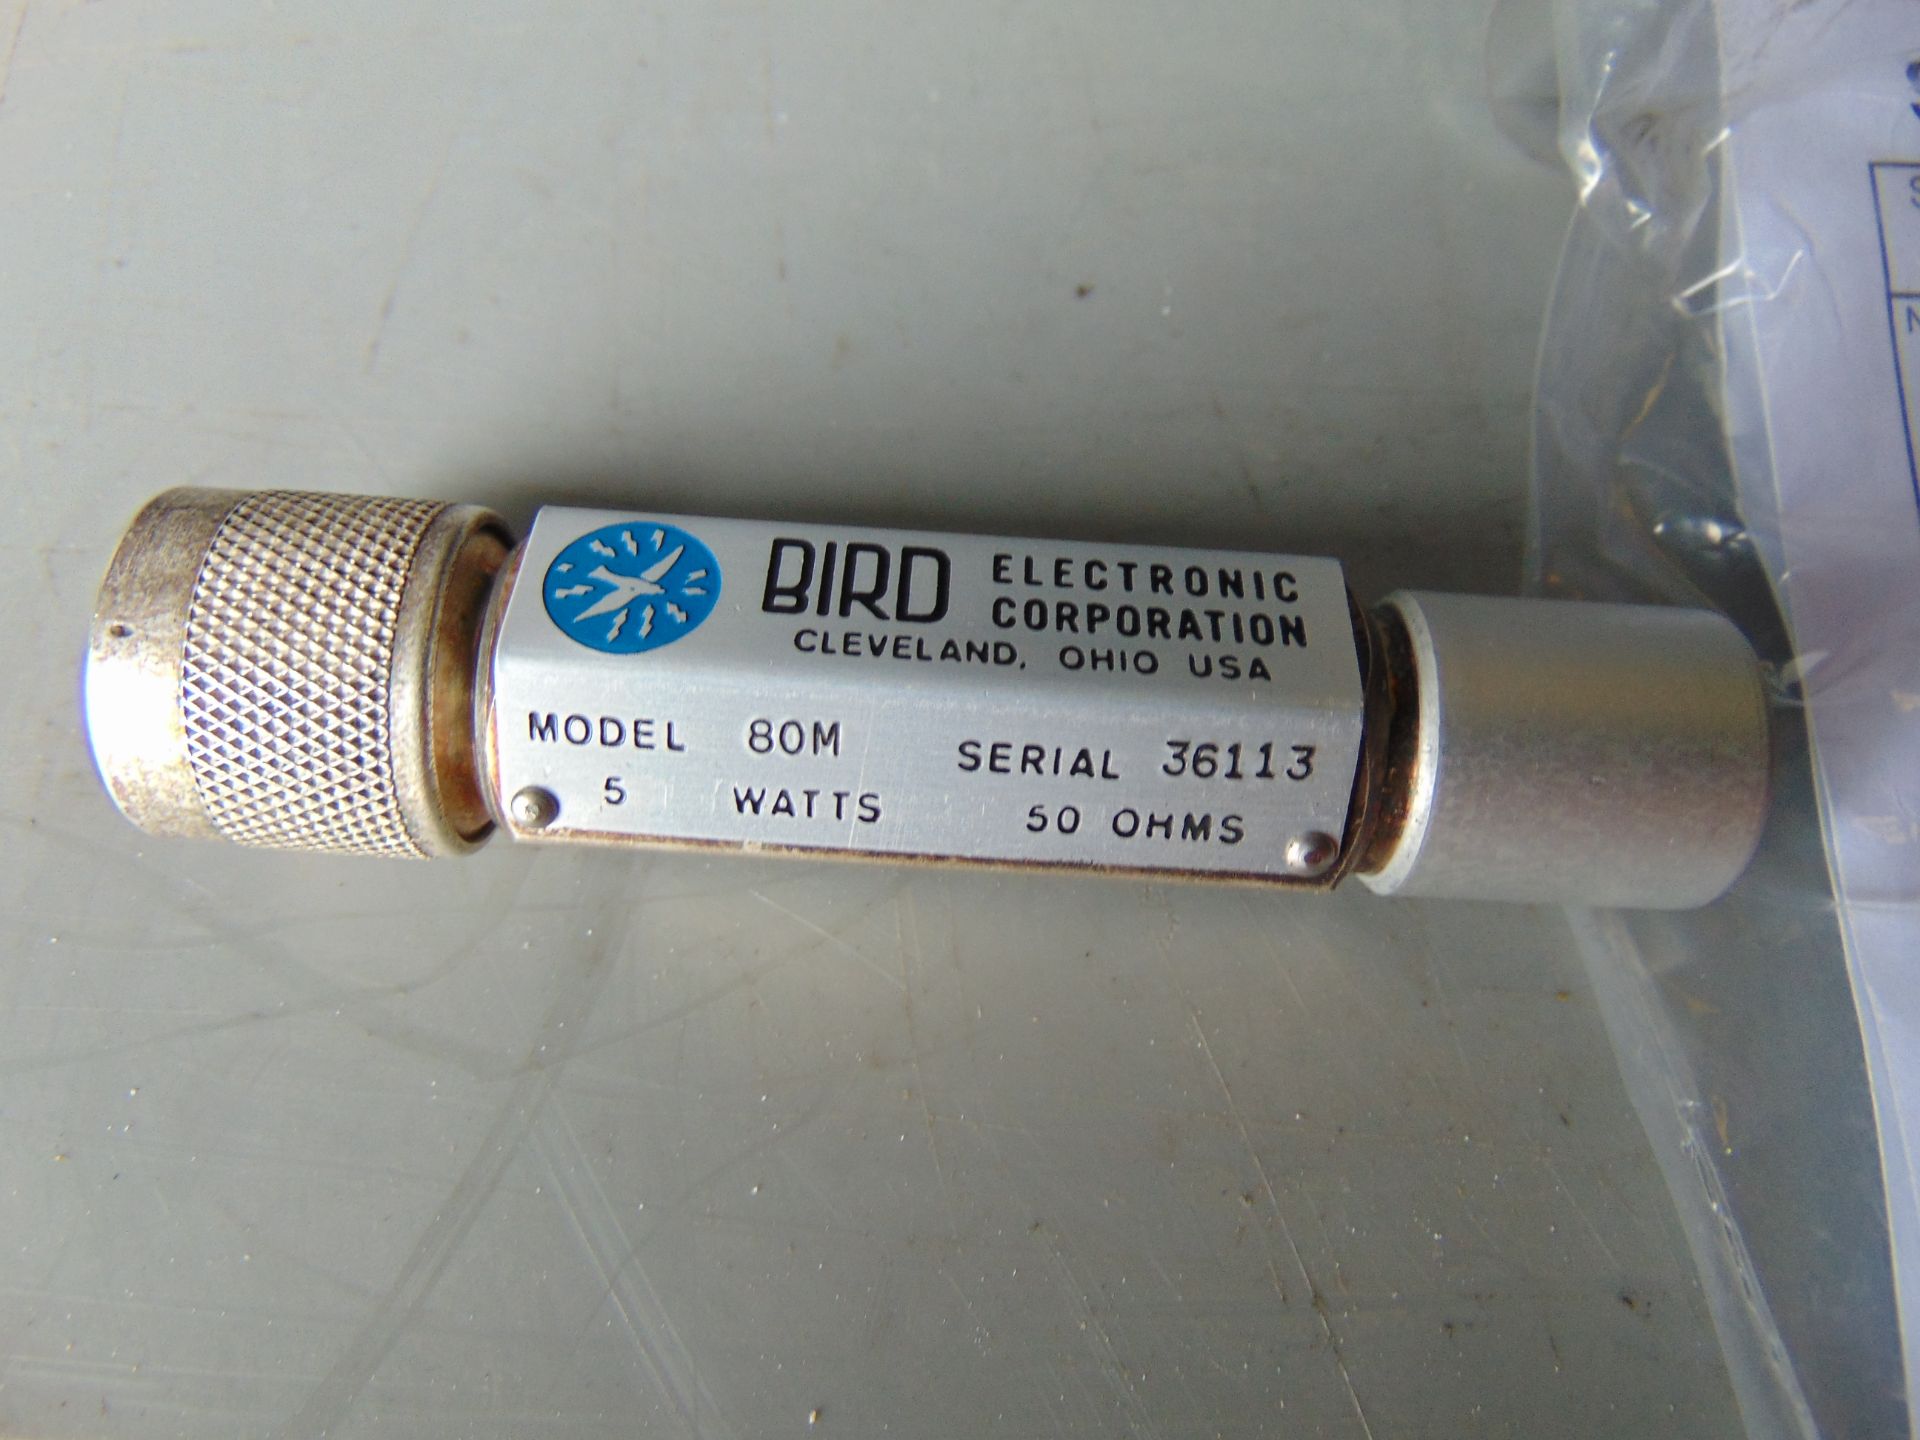 10 x Bird Coaxial Dummy, Dummy Loads A1 Serviceable - Image 2 of 7